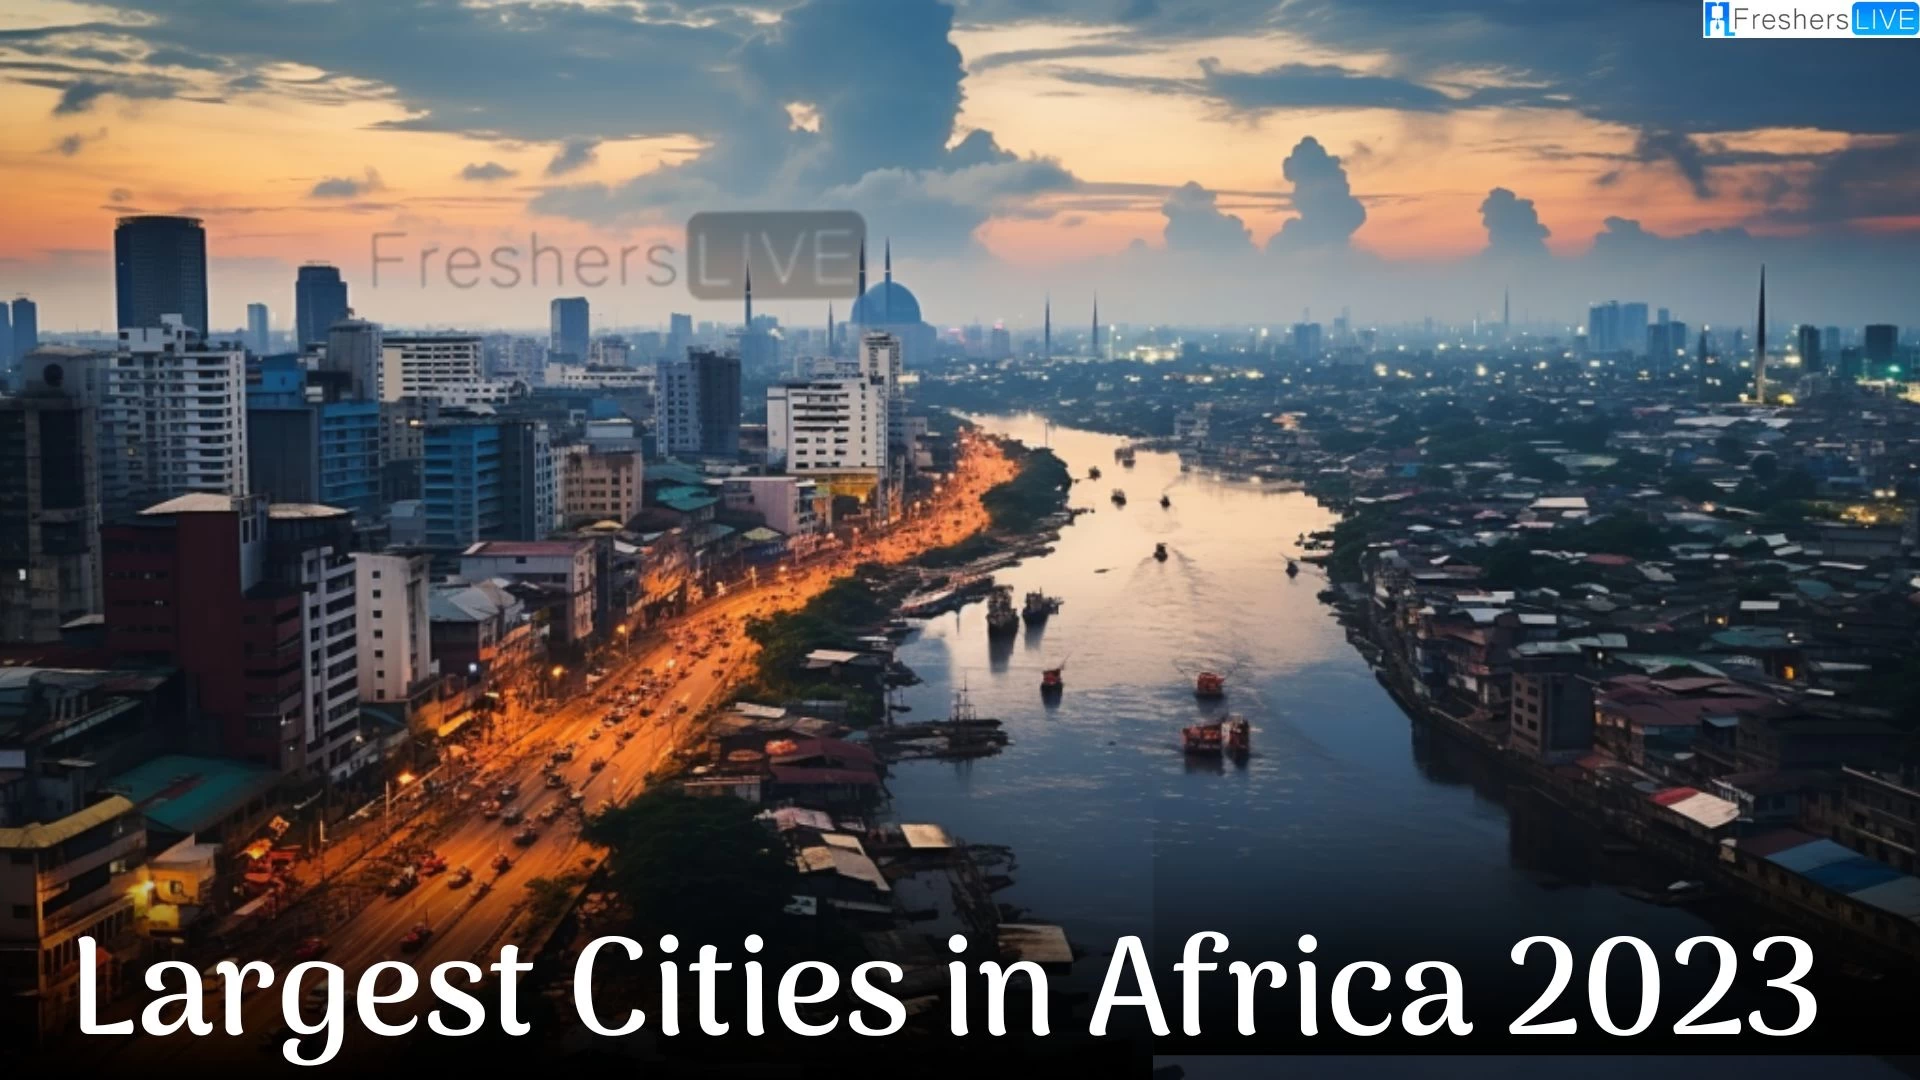 Largest Cities in Africa 2023 - Top 10 Biggest Cities with Population